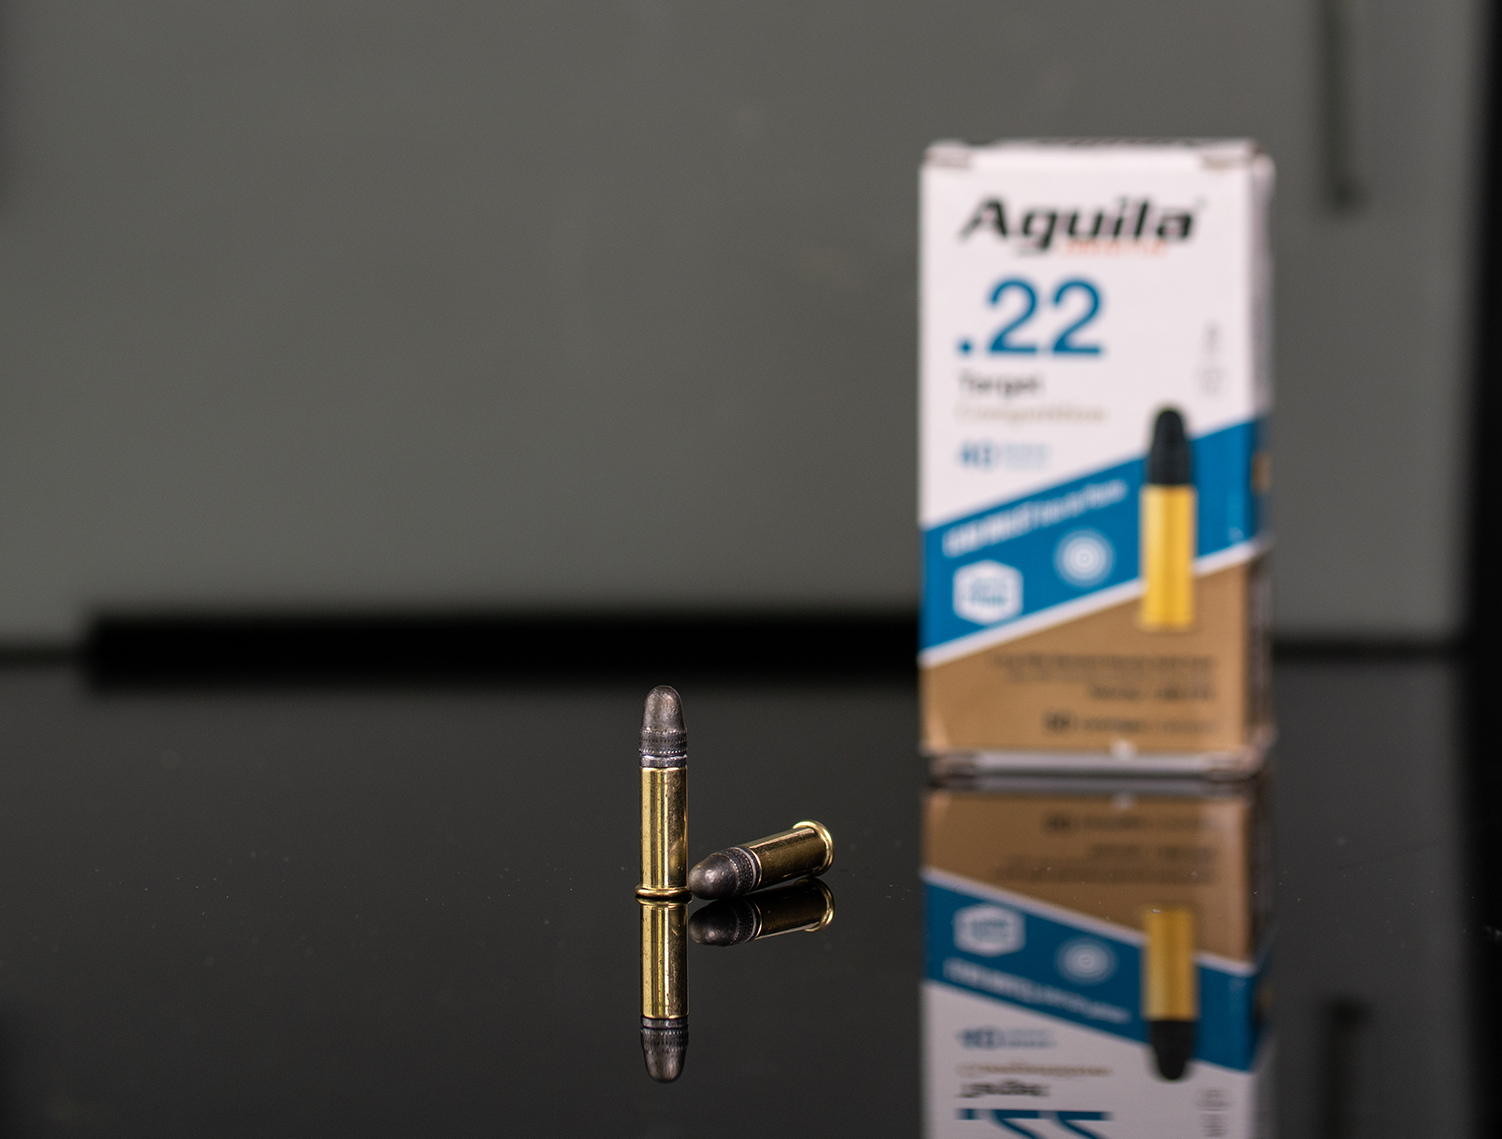 Aguila 22lr match ammo for competition shooters